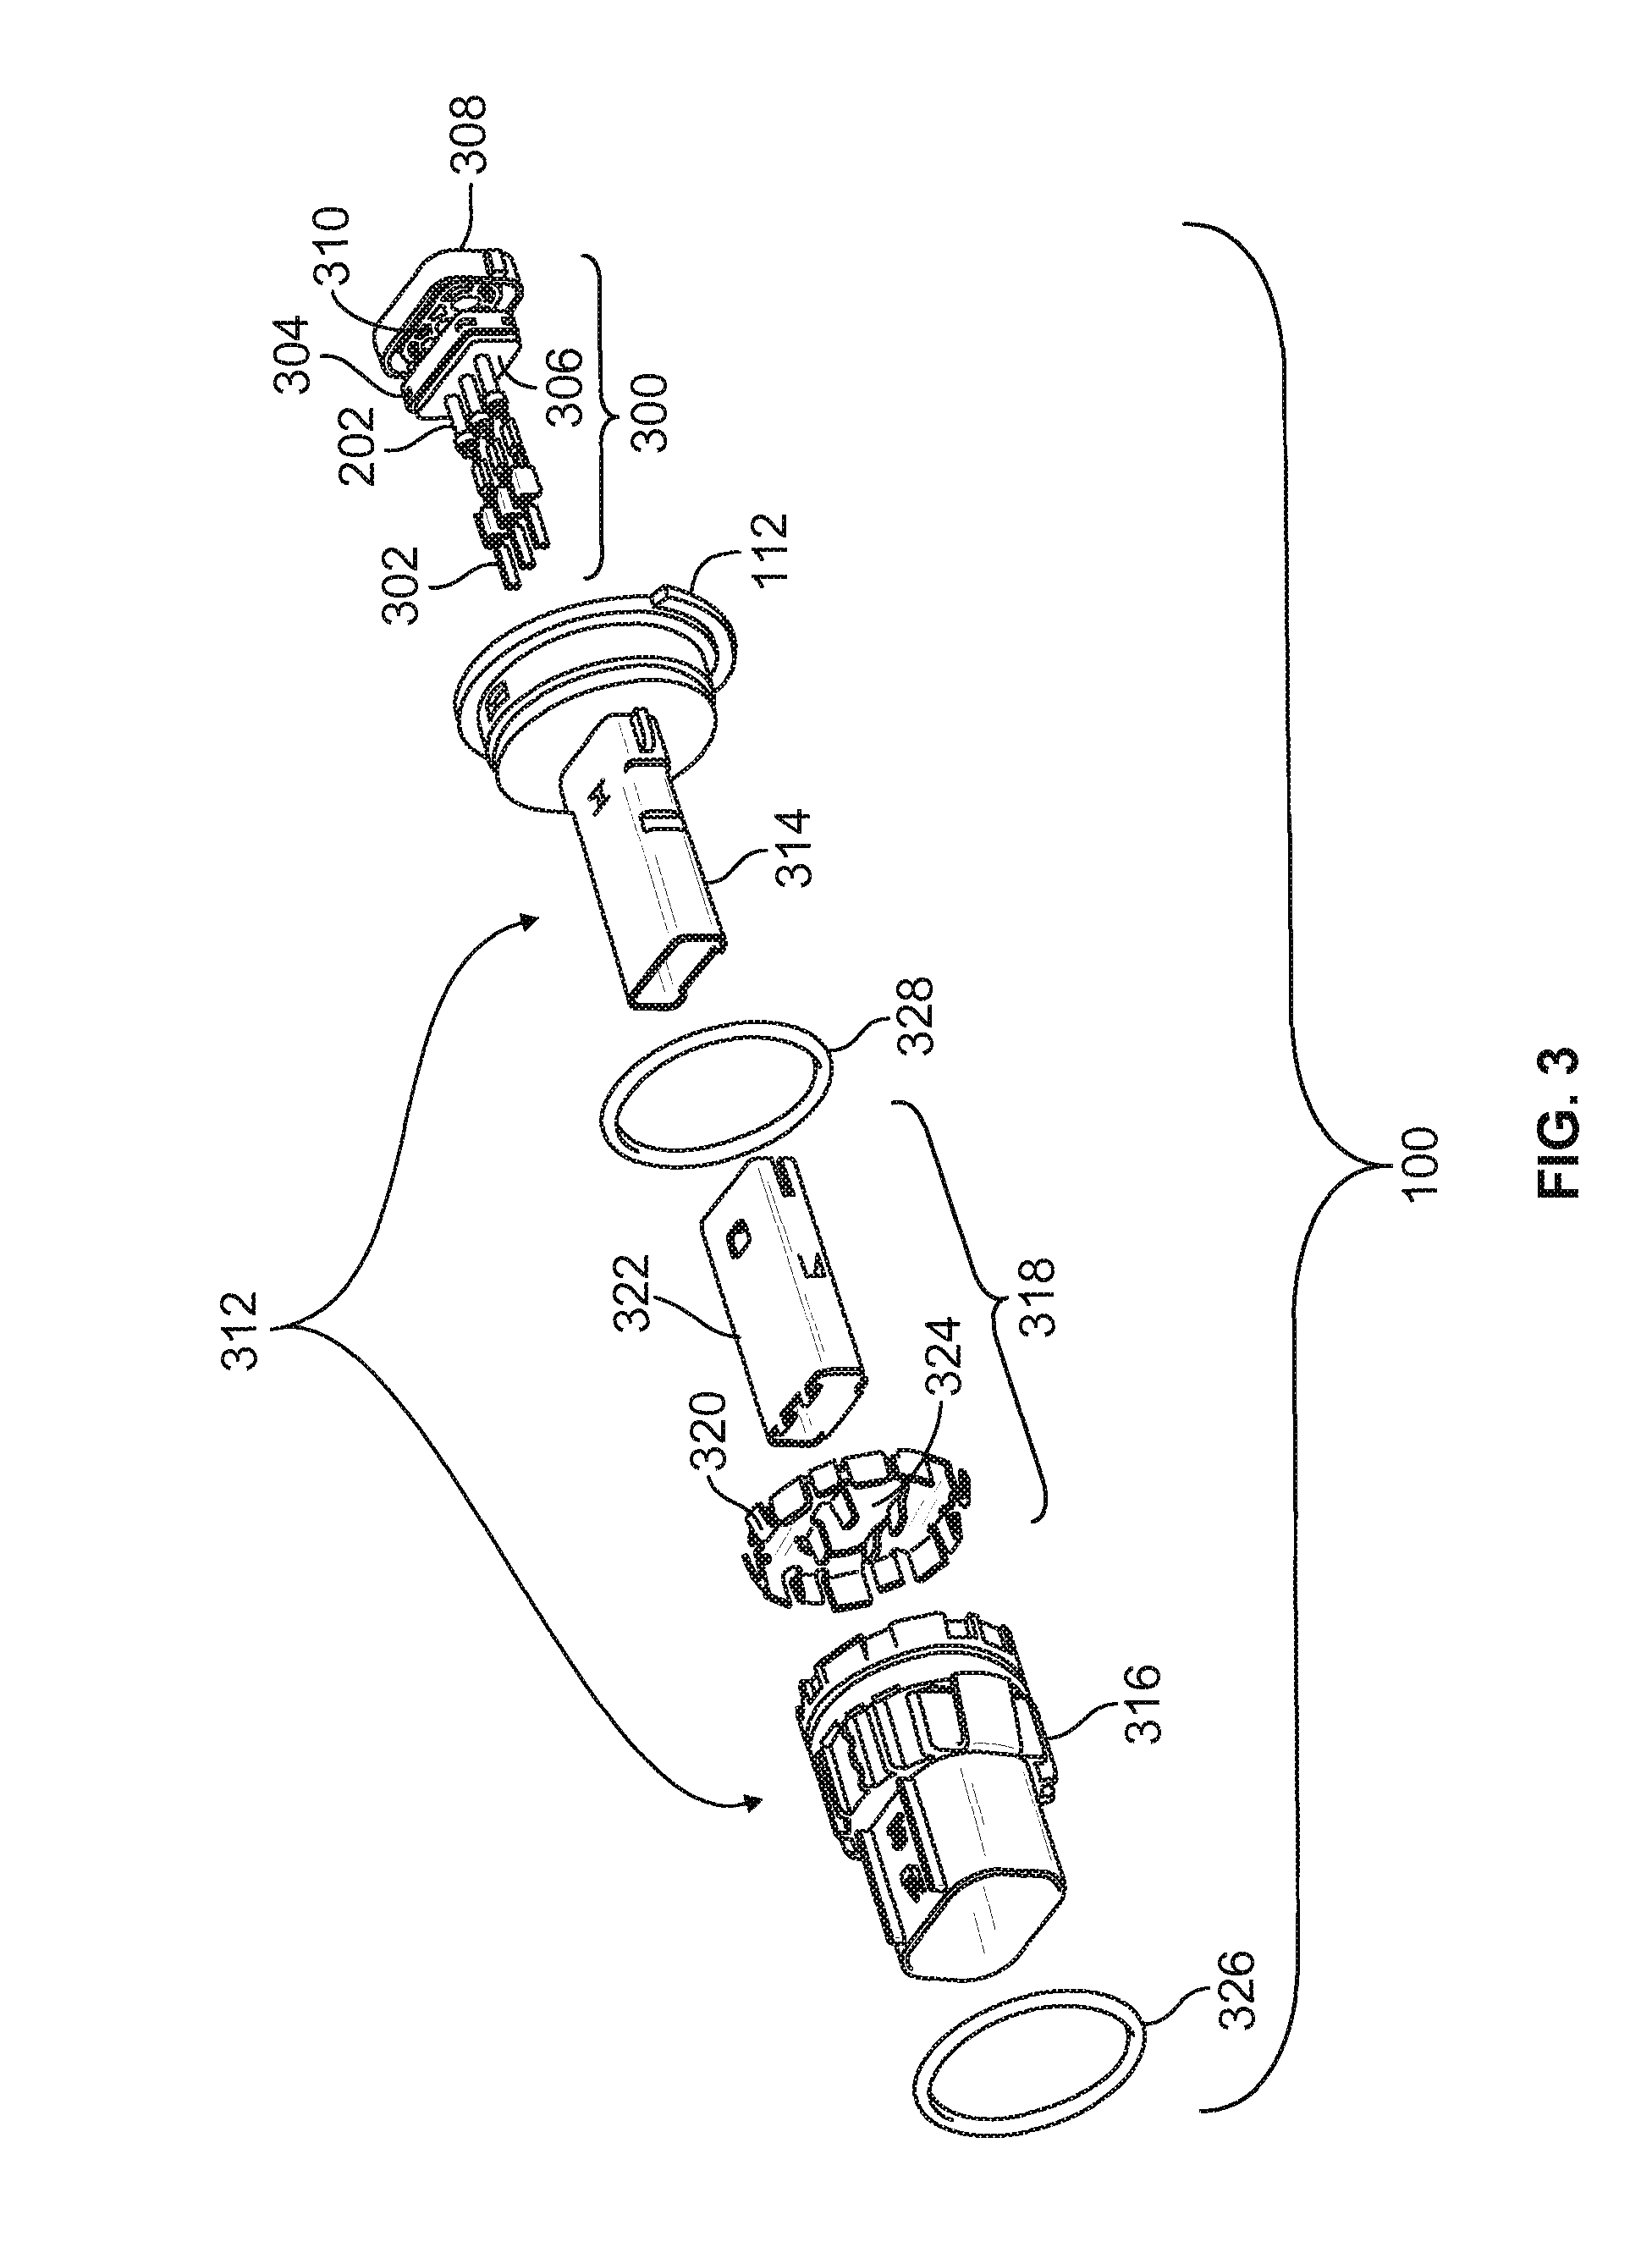 Header connector assembly